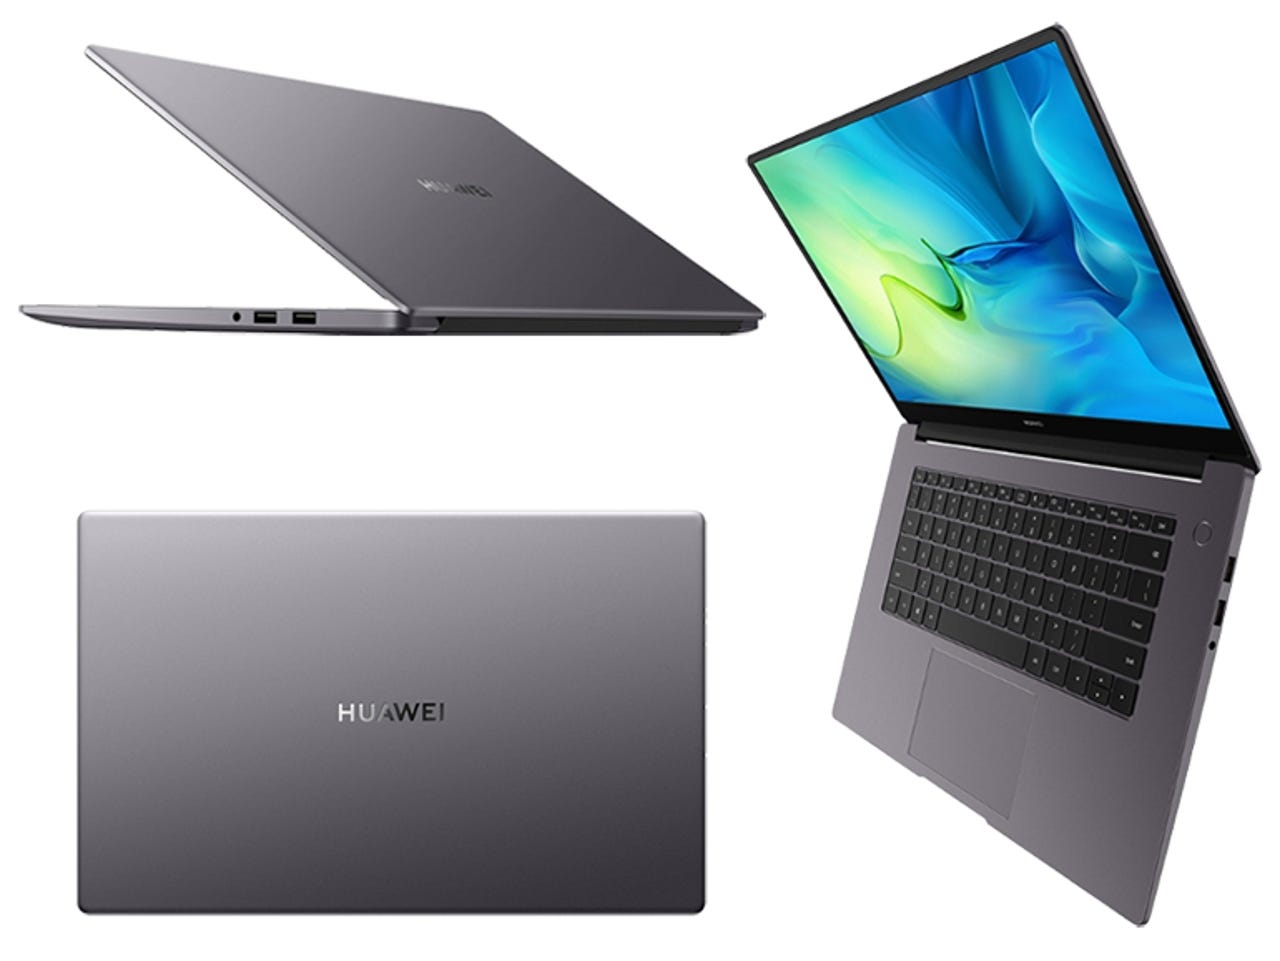 Huawei Matebook D15 - full specs, details and review